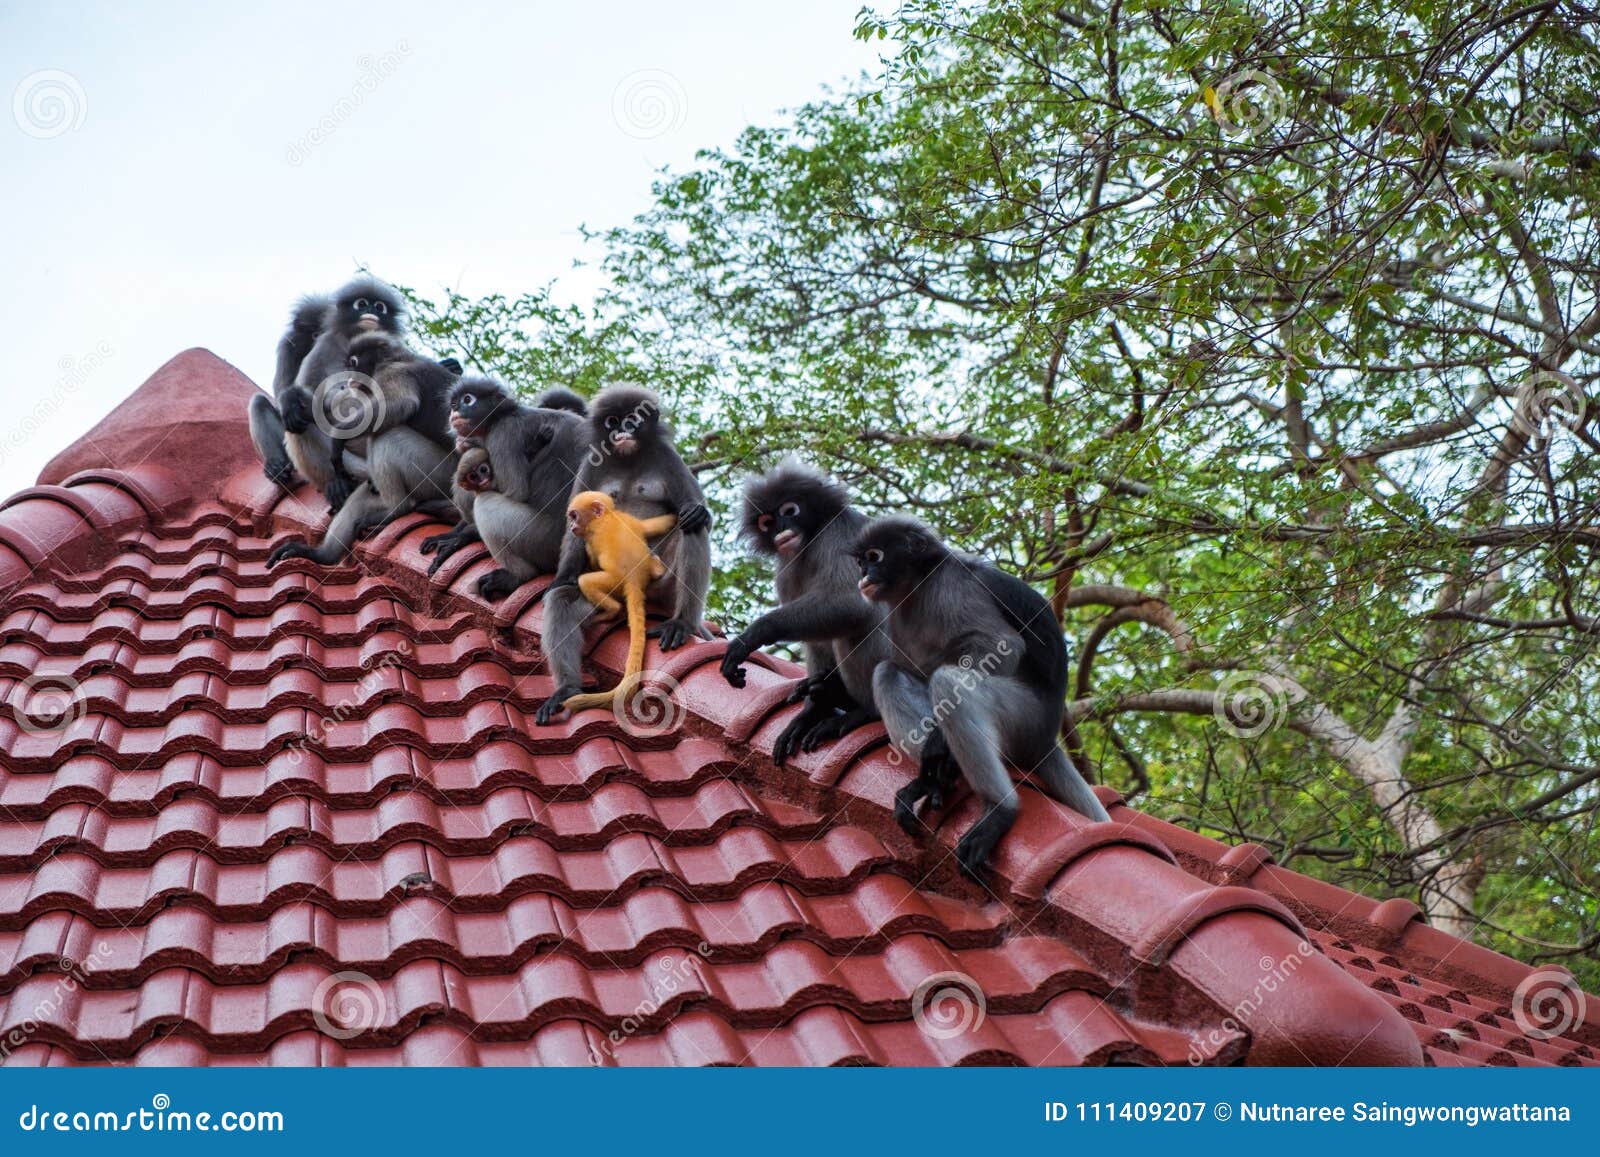 Wildlife Background With Monkeys And Baby Monkey On Roof Top Image For Animal Mammal Nature Wild Pet Travel Zoo Concept Stock Image Image Of Front Nature